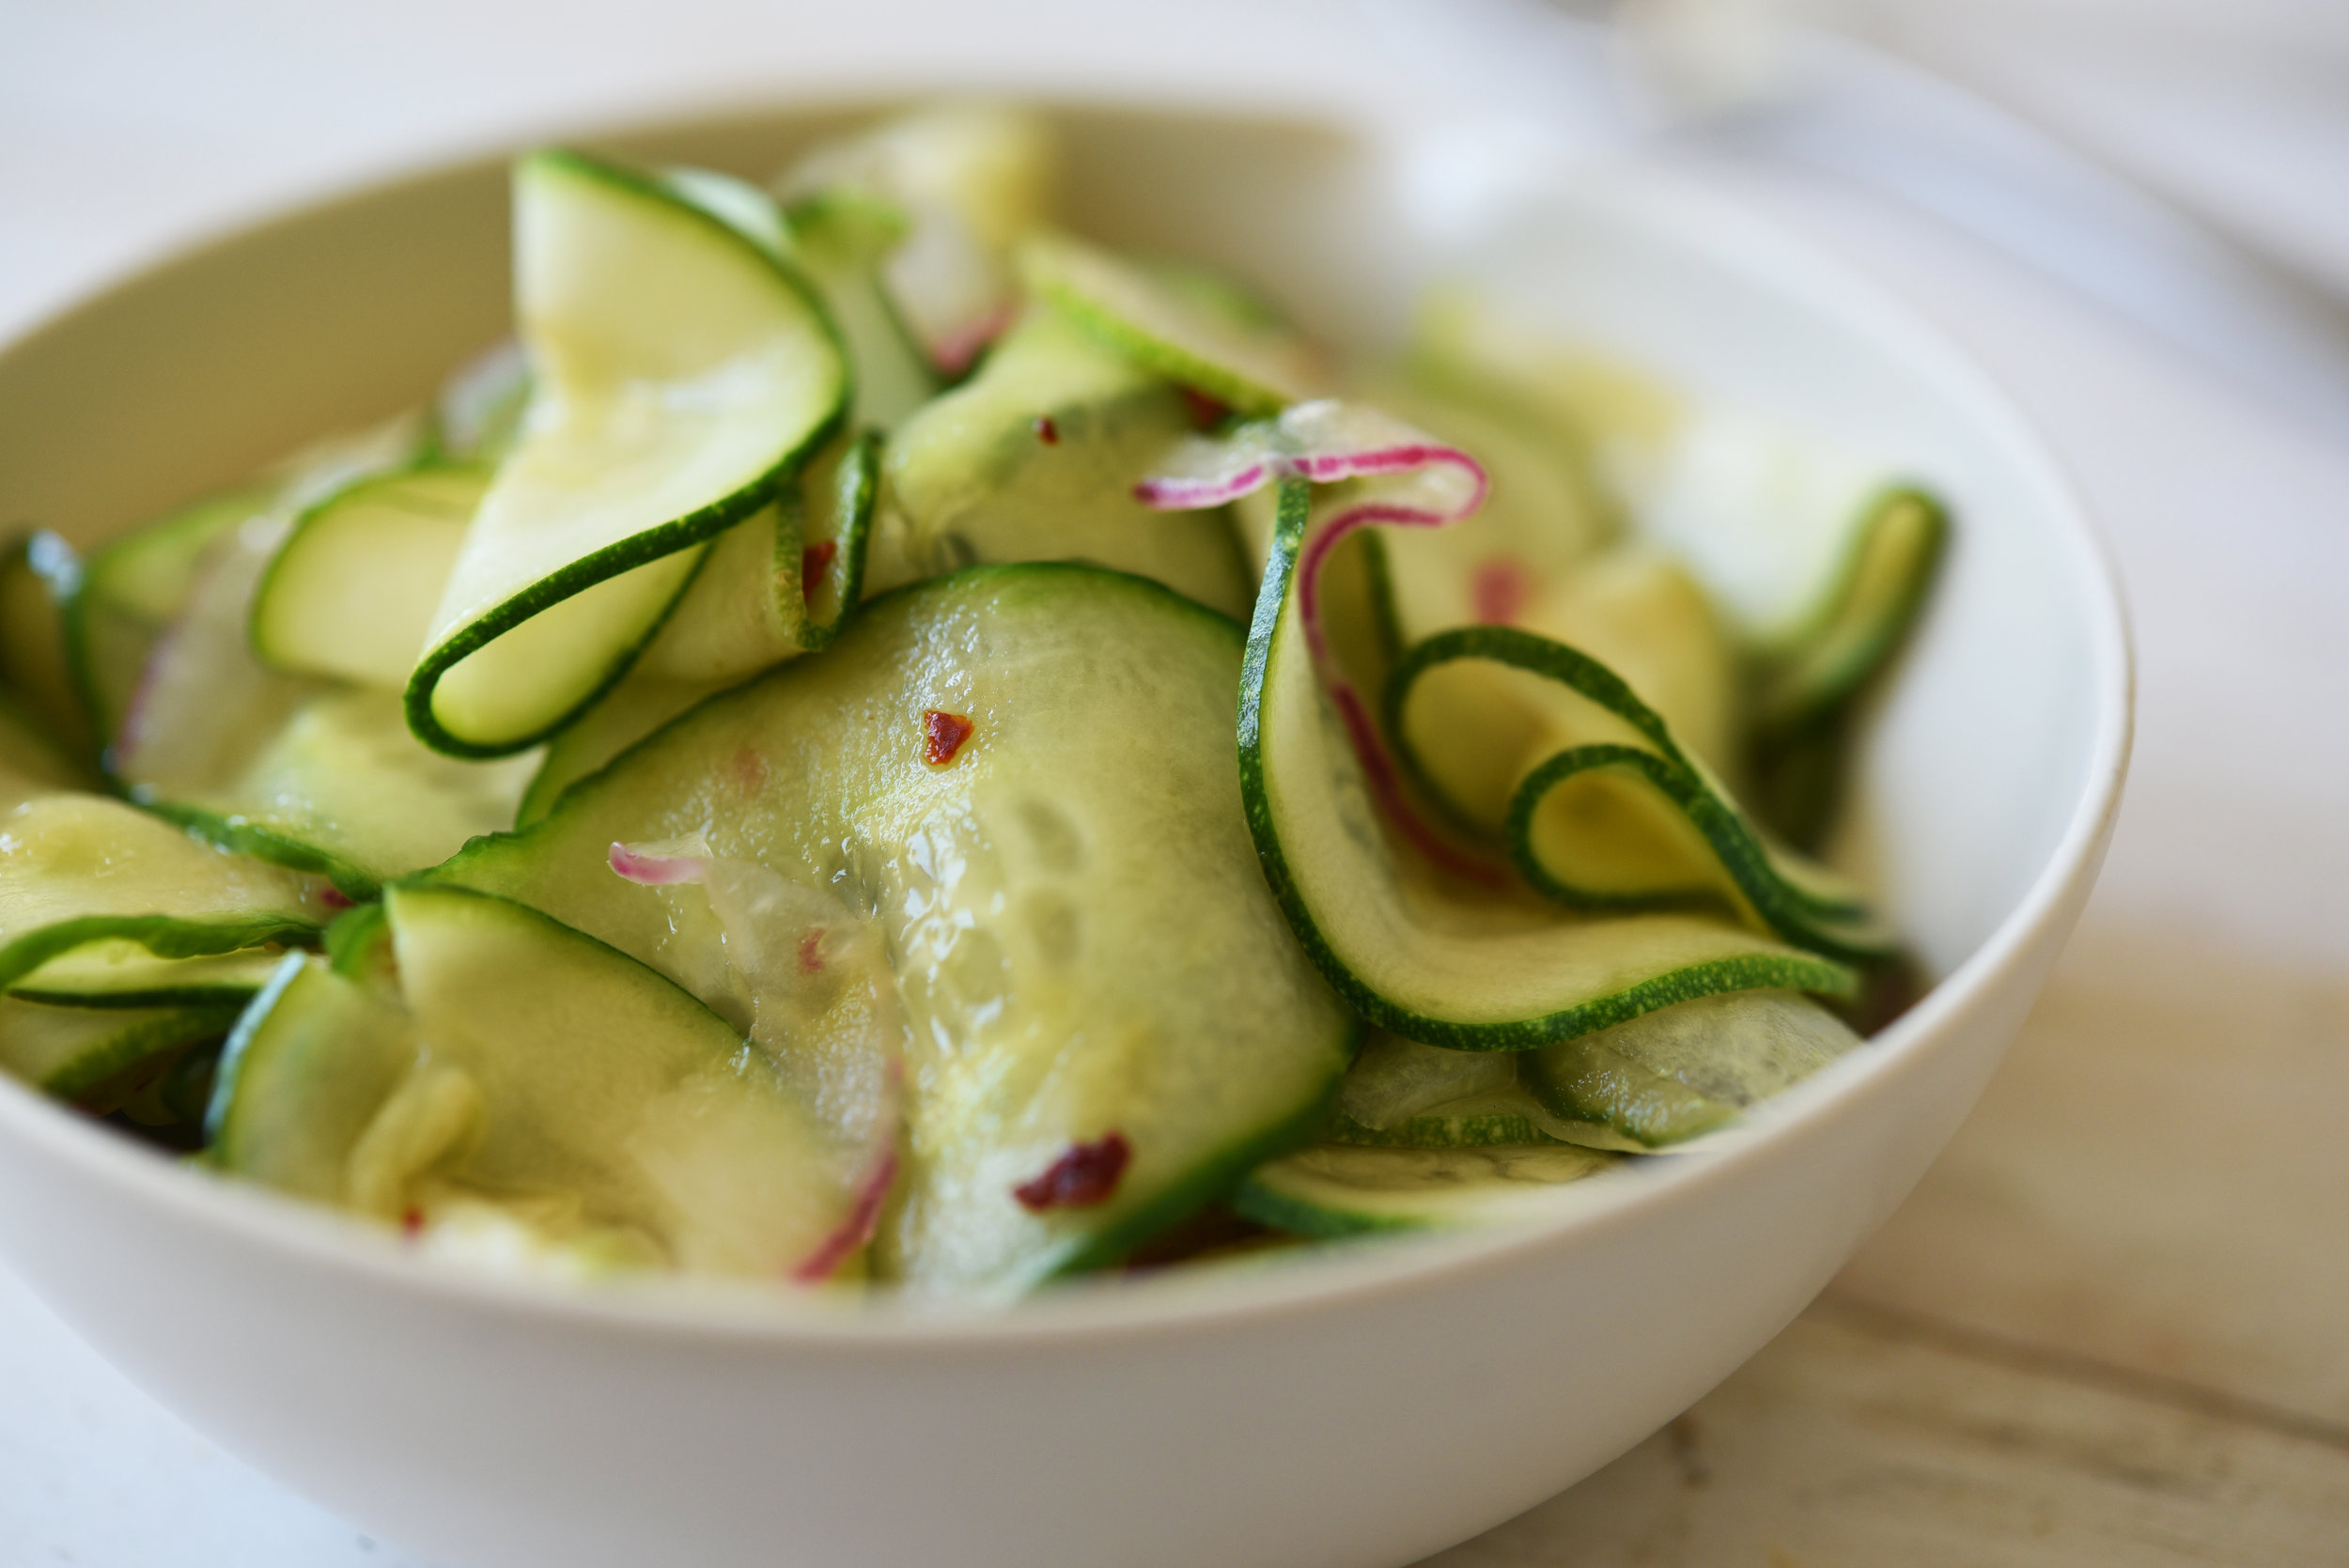 Image of Cucumbers and zucchini in a salad